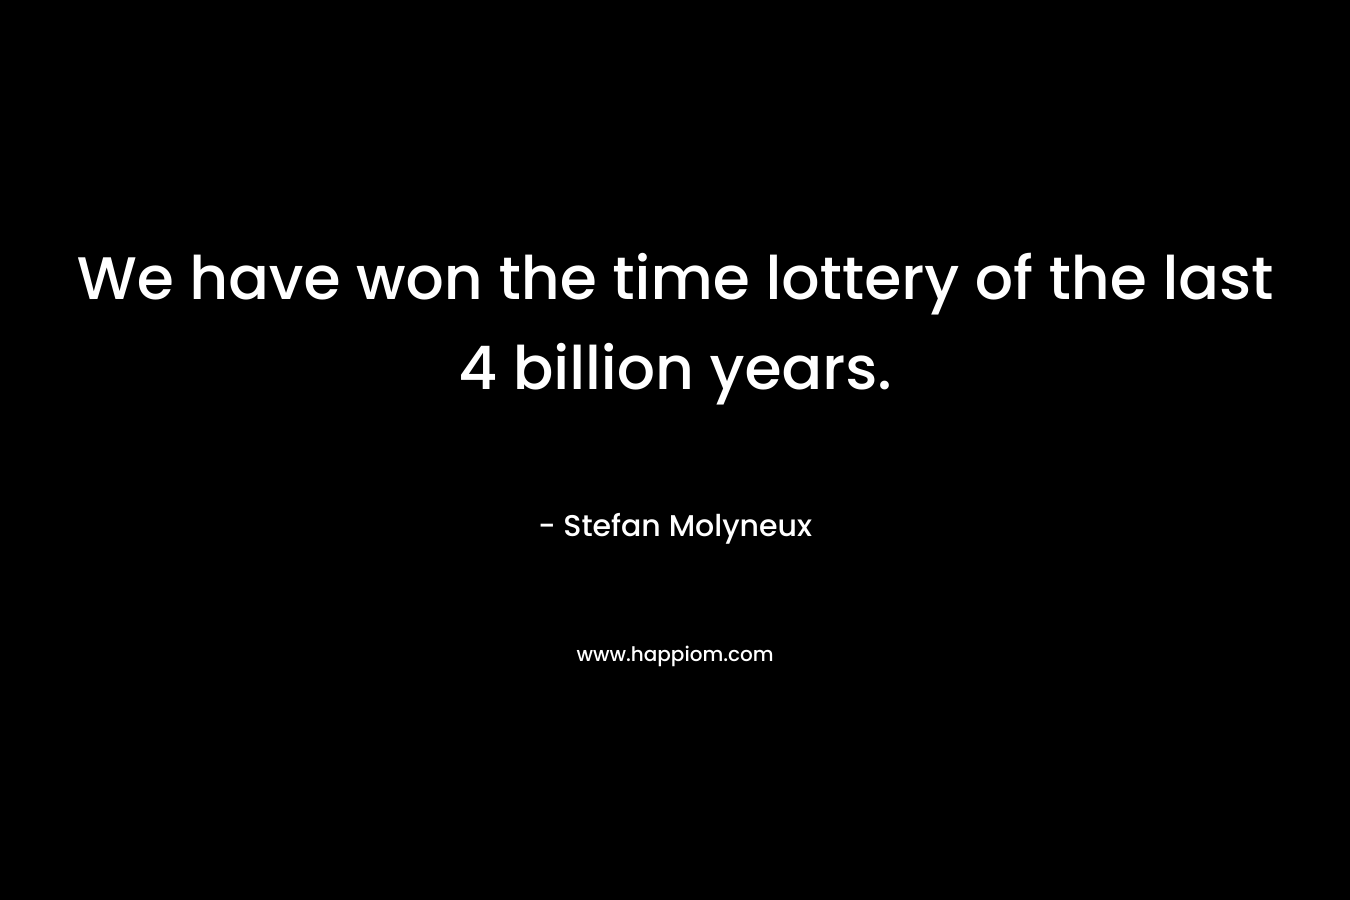 We have won the time lottery of the last 4 billion years.